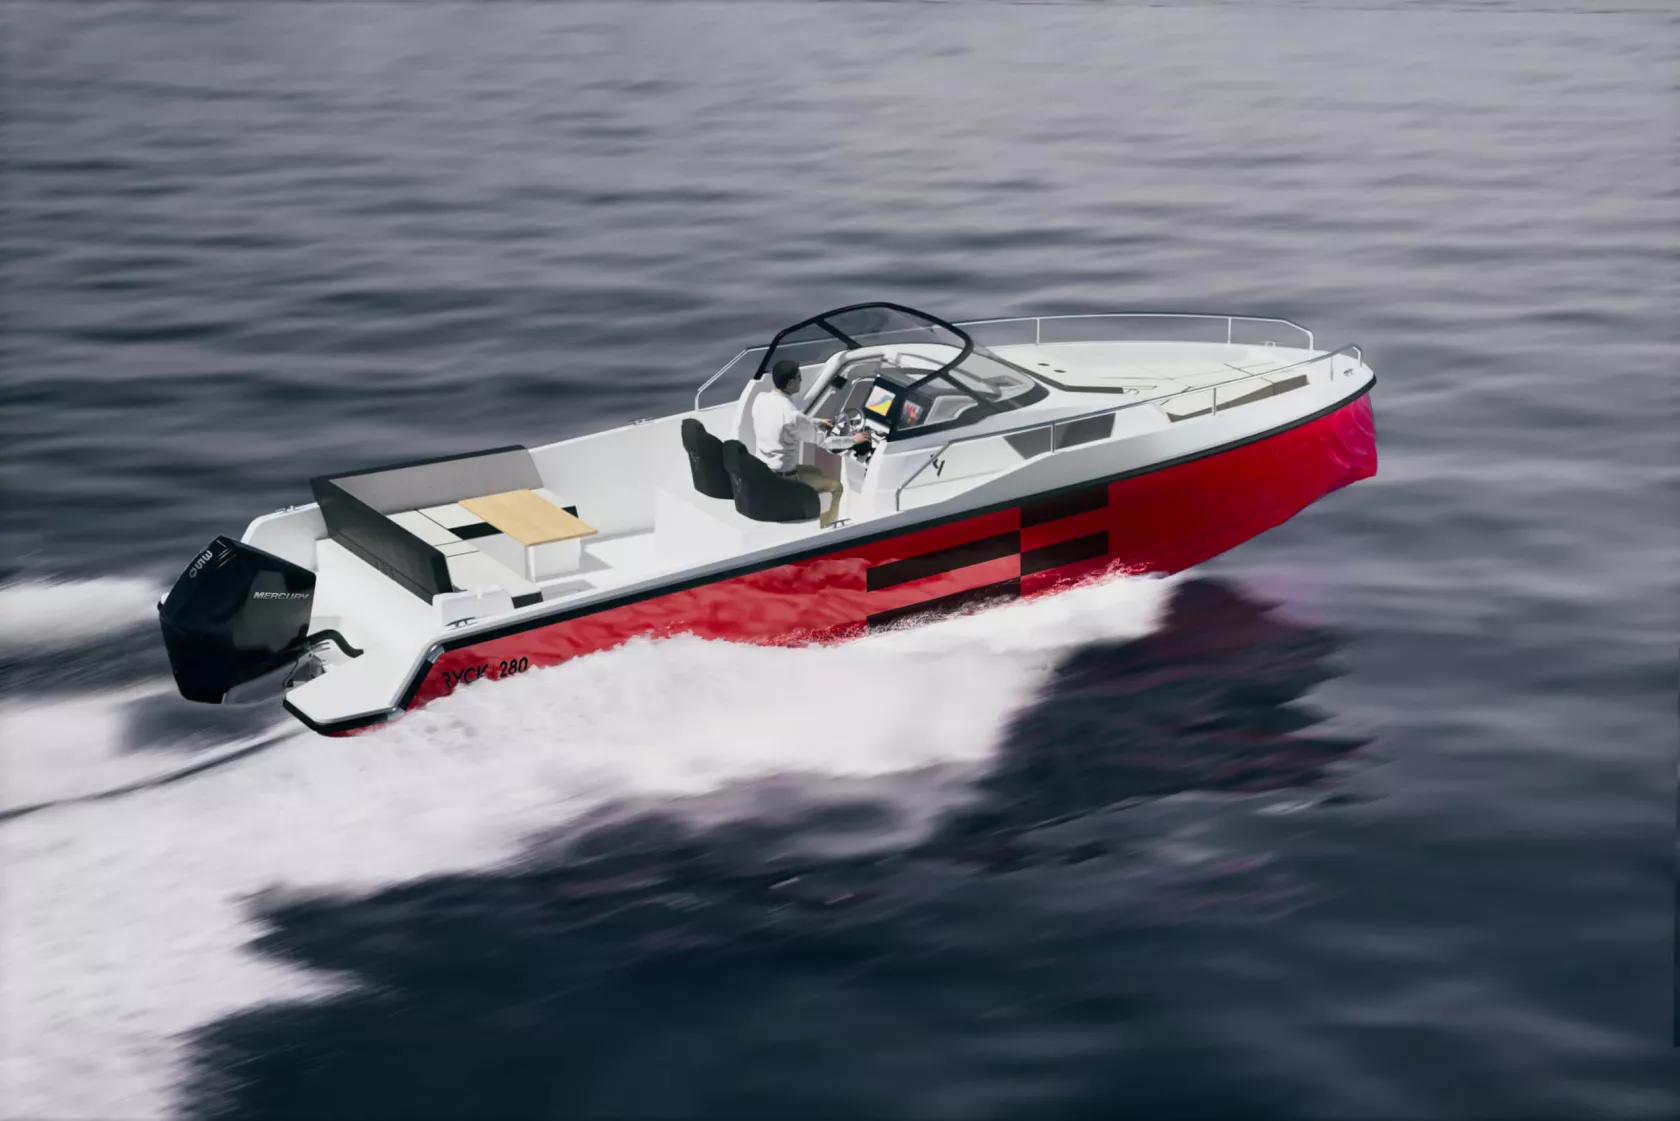 RYCK 280 – NOMINATED FOR THE “EUROPEAN POWERBOAT OF THE YEAR 2022” AWARD